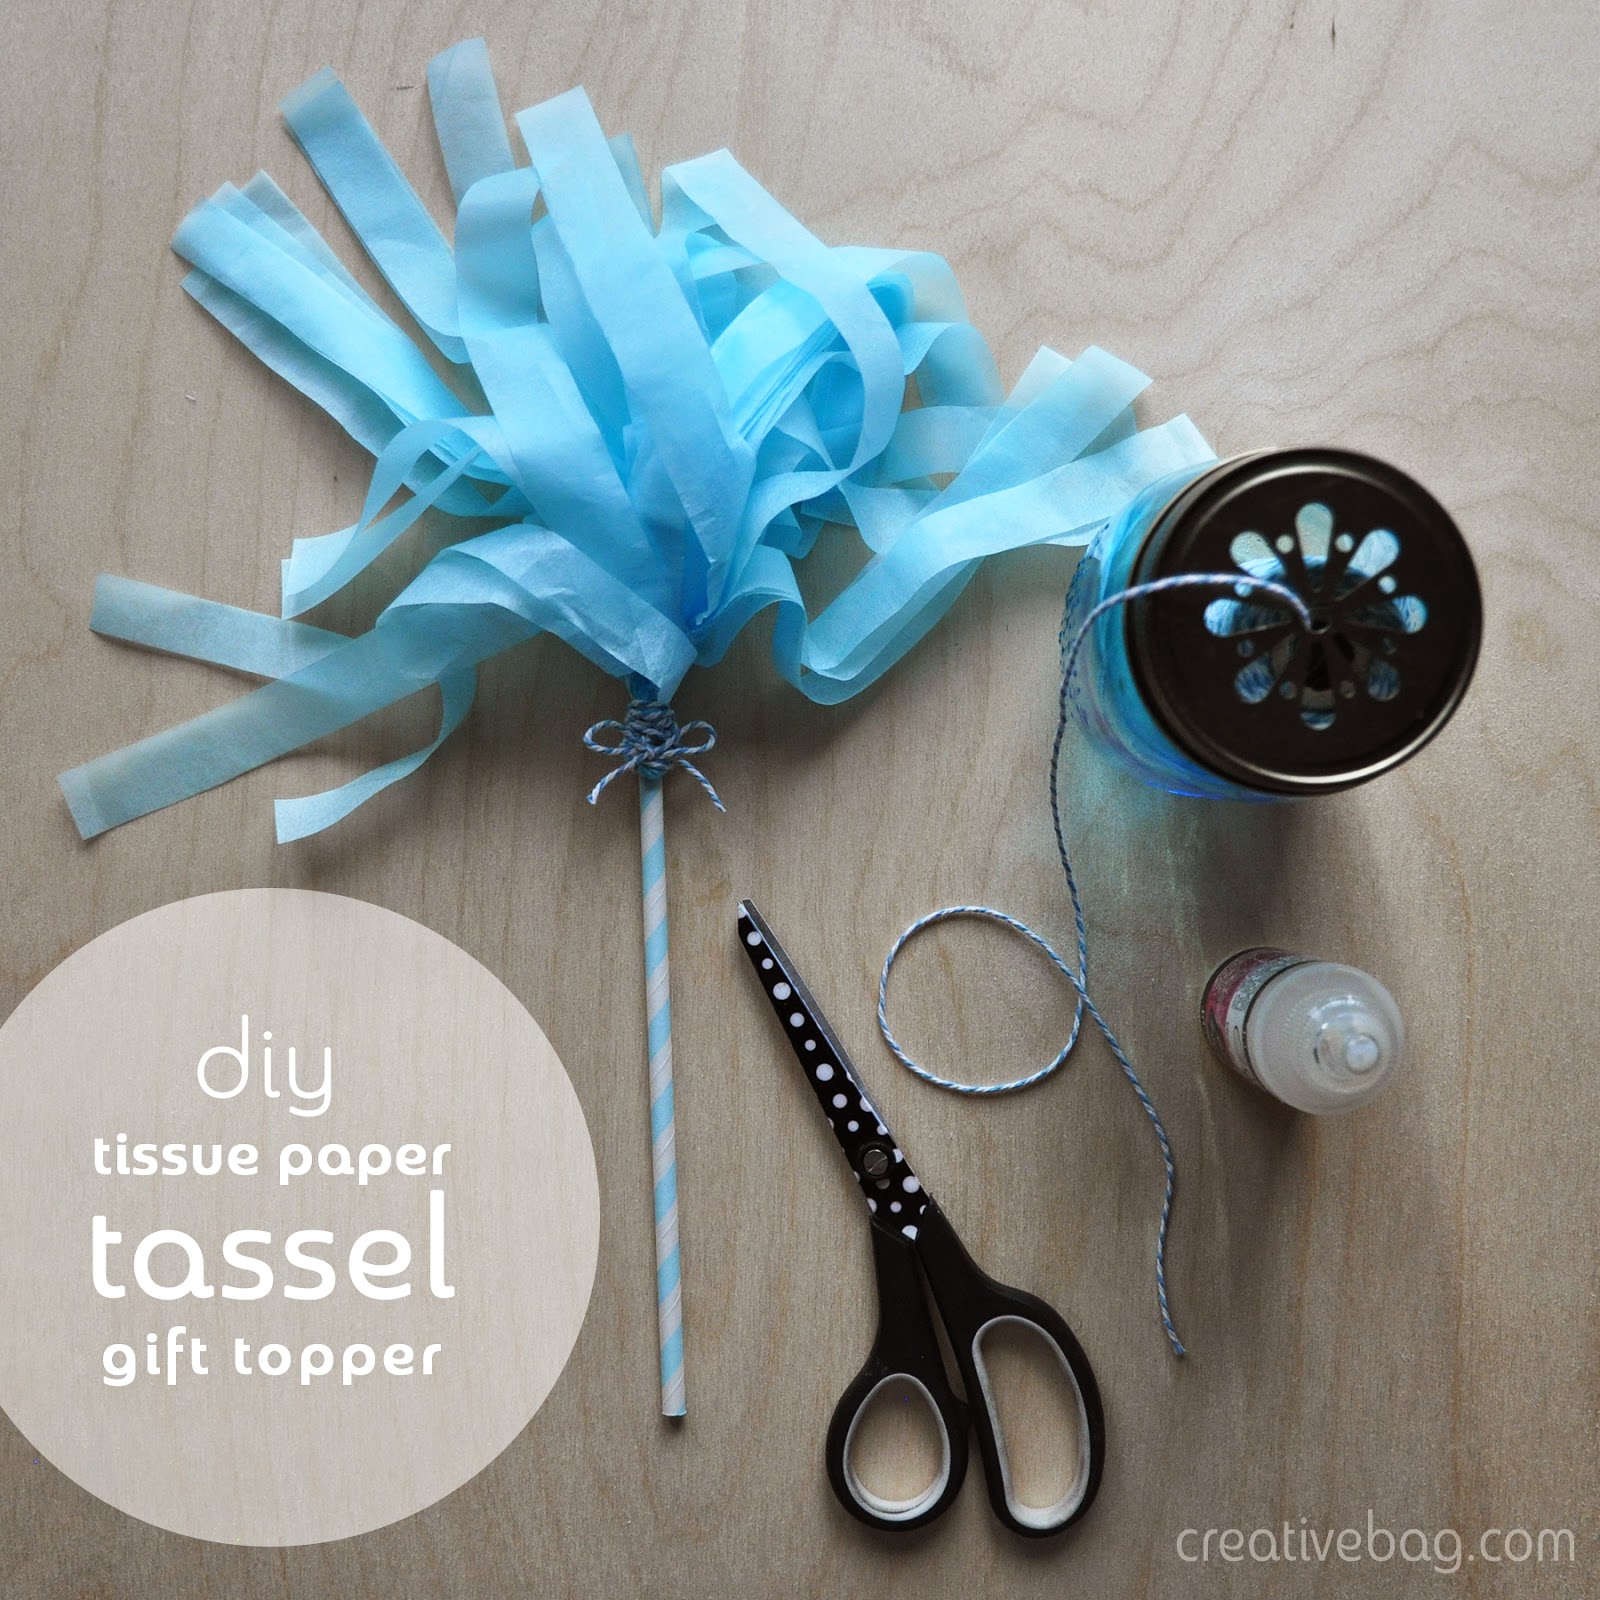 diy tissue paper tassel gift toppers by Lorrie Everitt from Creative Bag